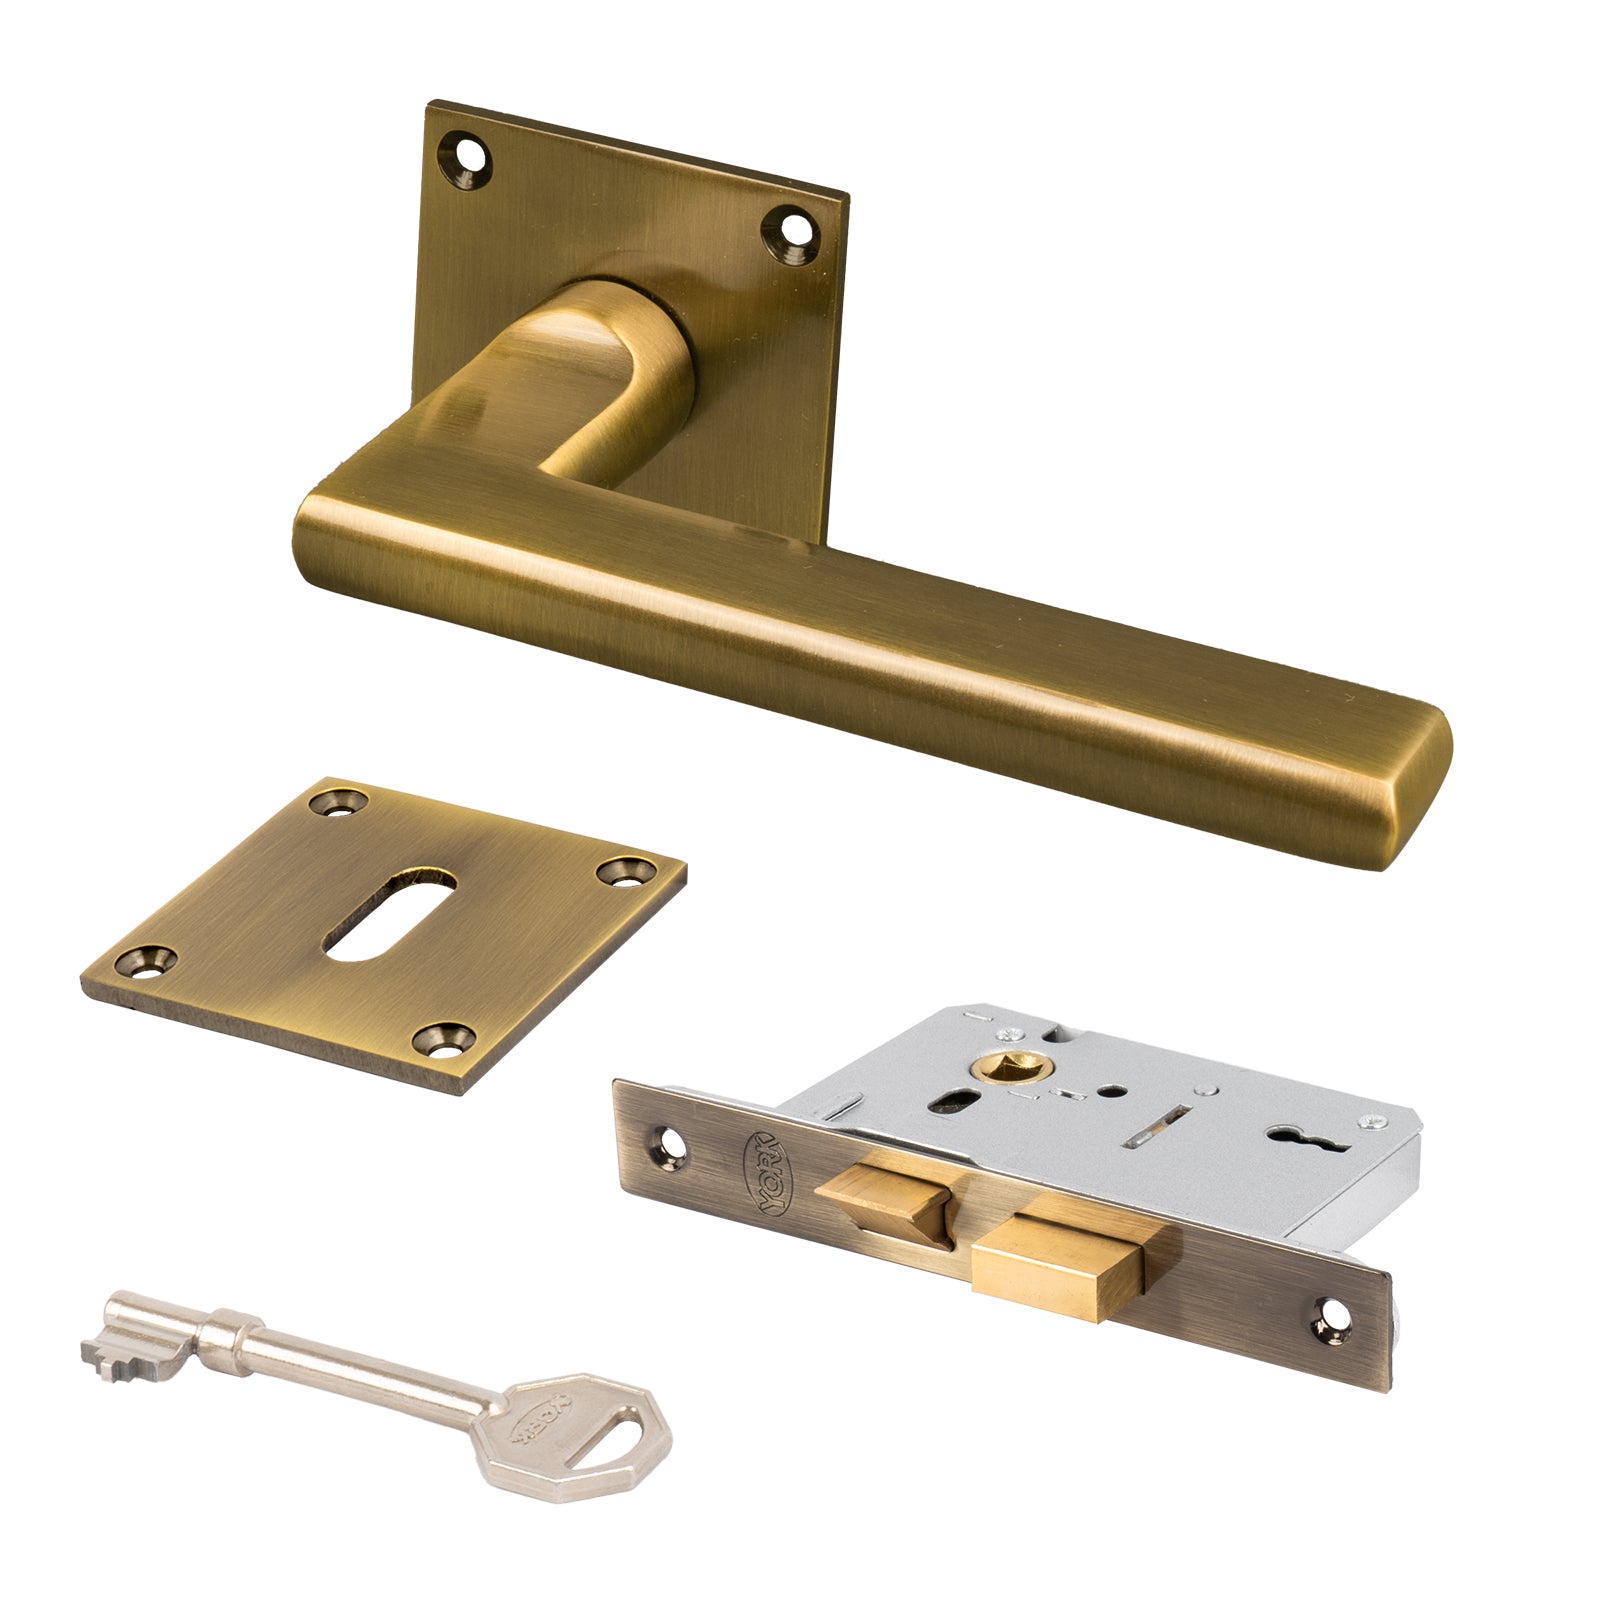 SHOW Trident Square Rose Door Handles 3 Lever Latch set with Aged Brass finish